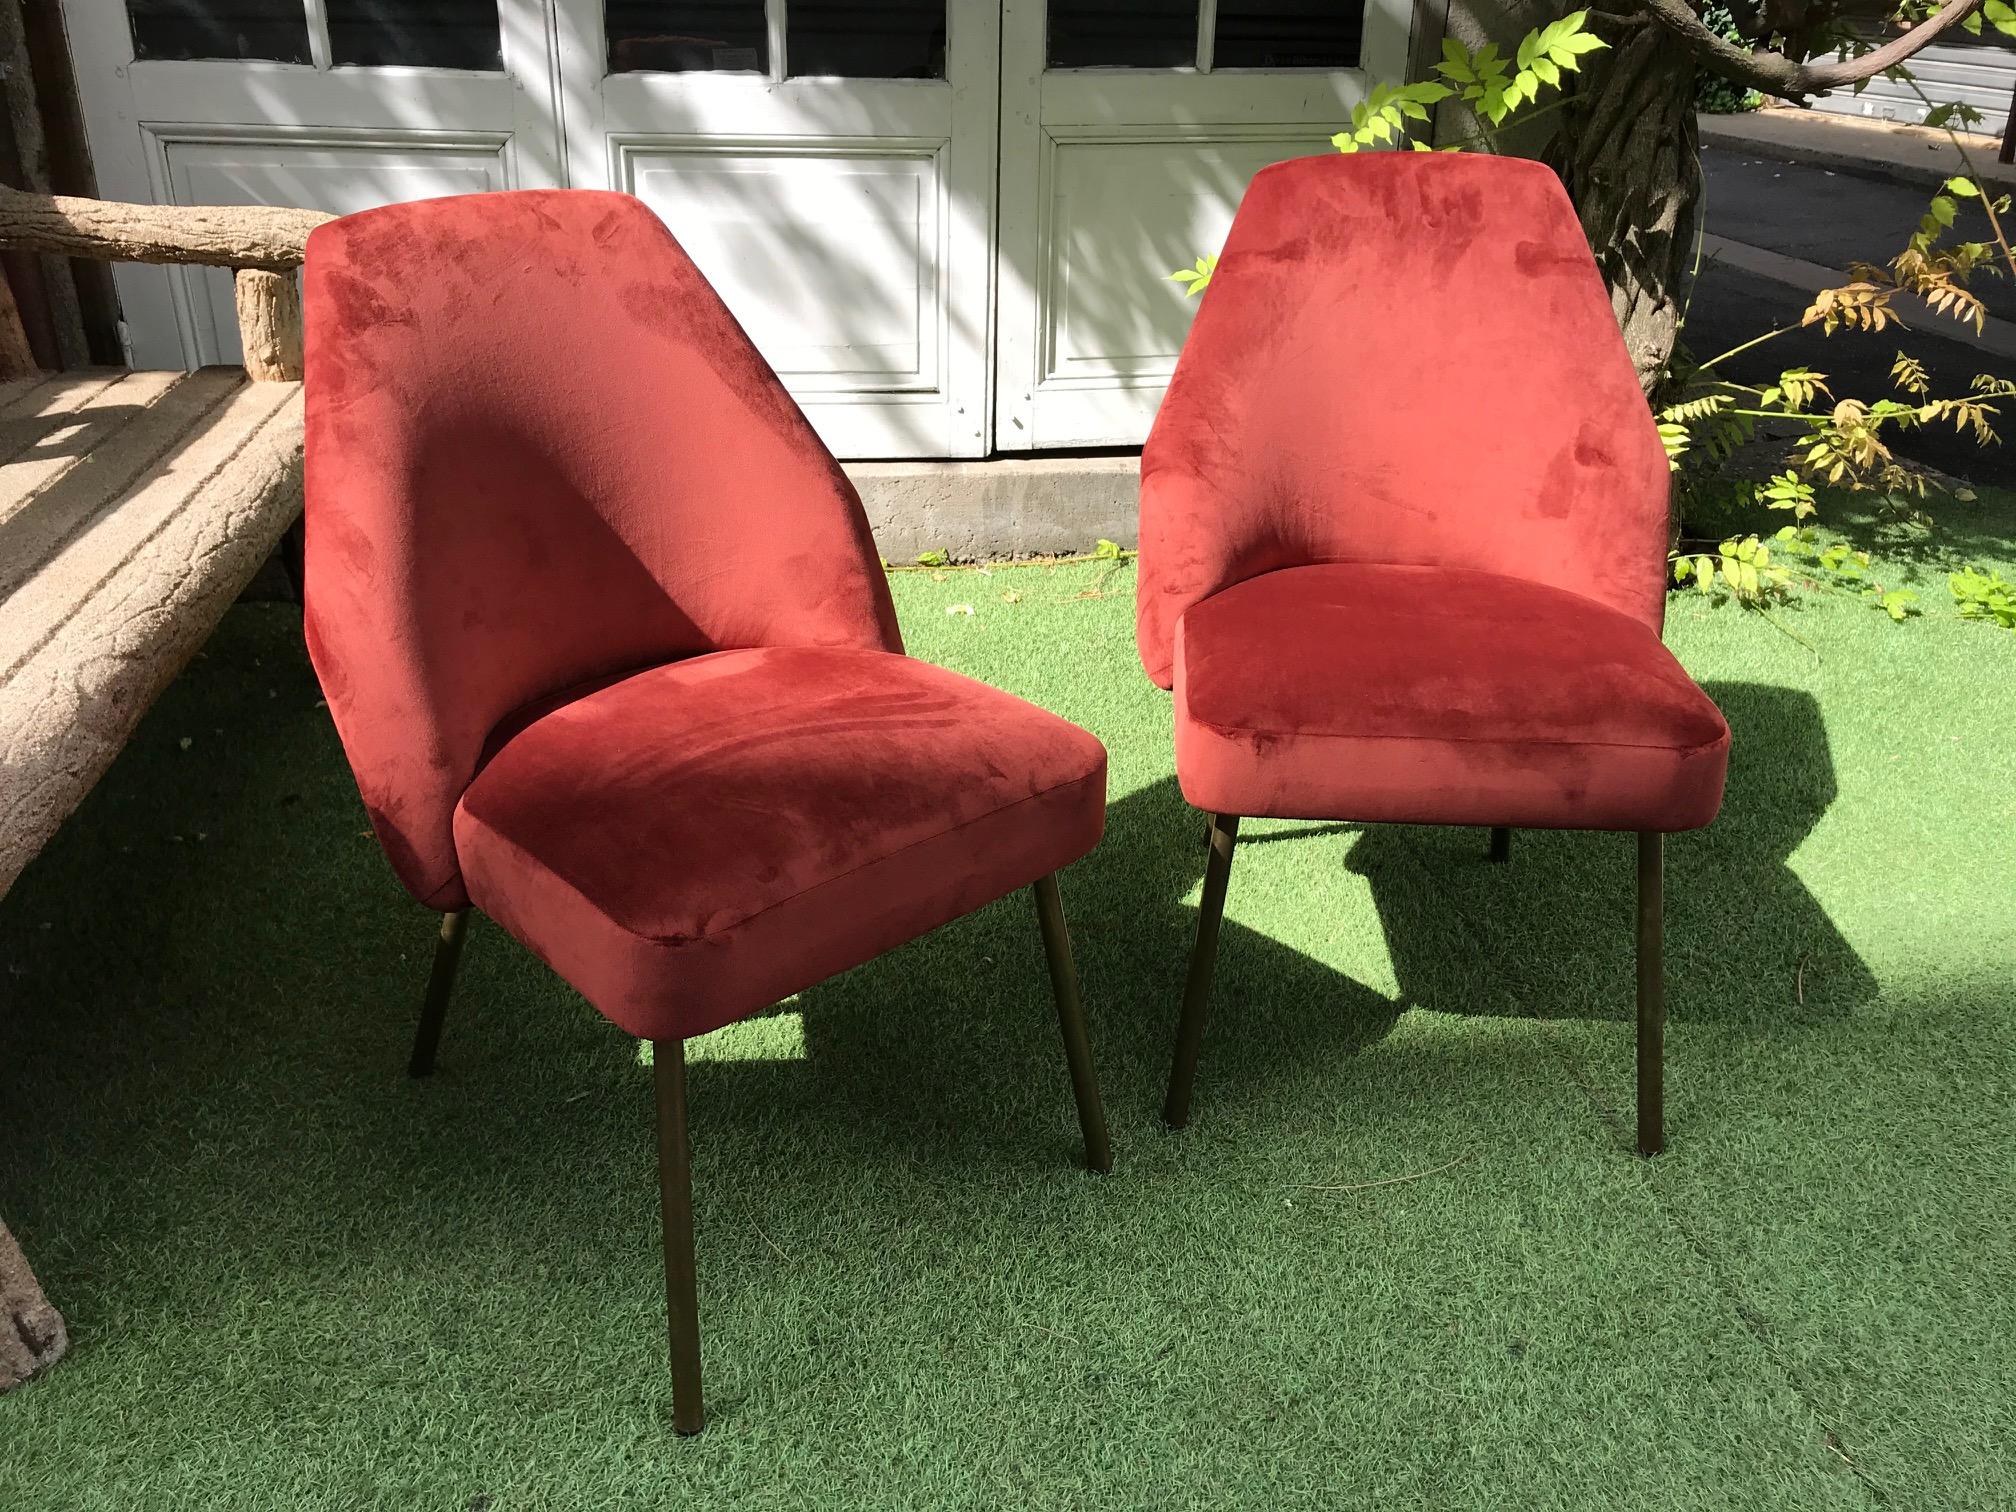 Pair of Campanula chairs by Carlo Pagani for Arflex. Nice Bordeaux velvet.